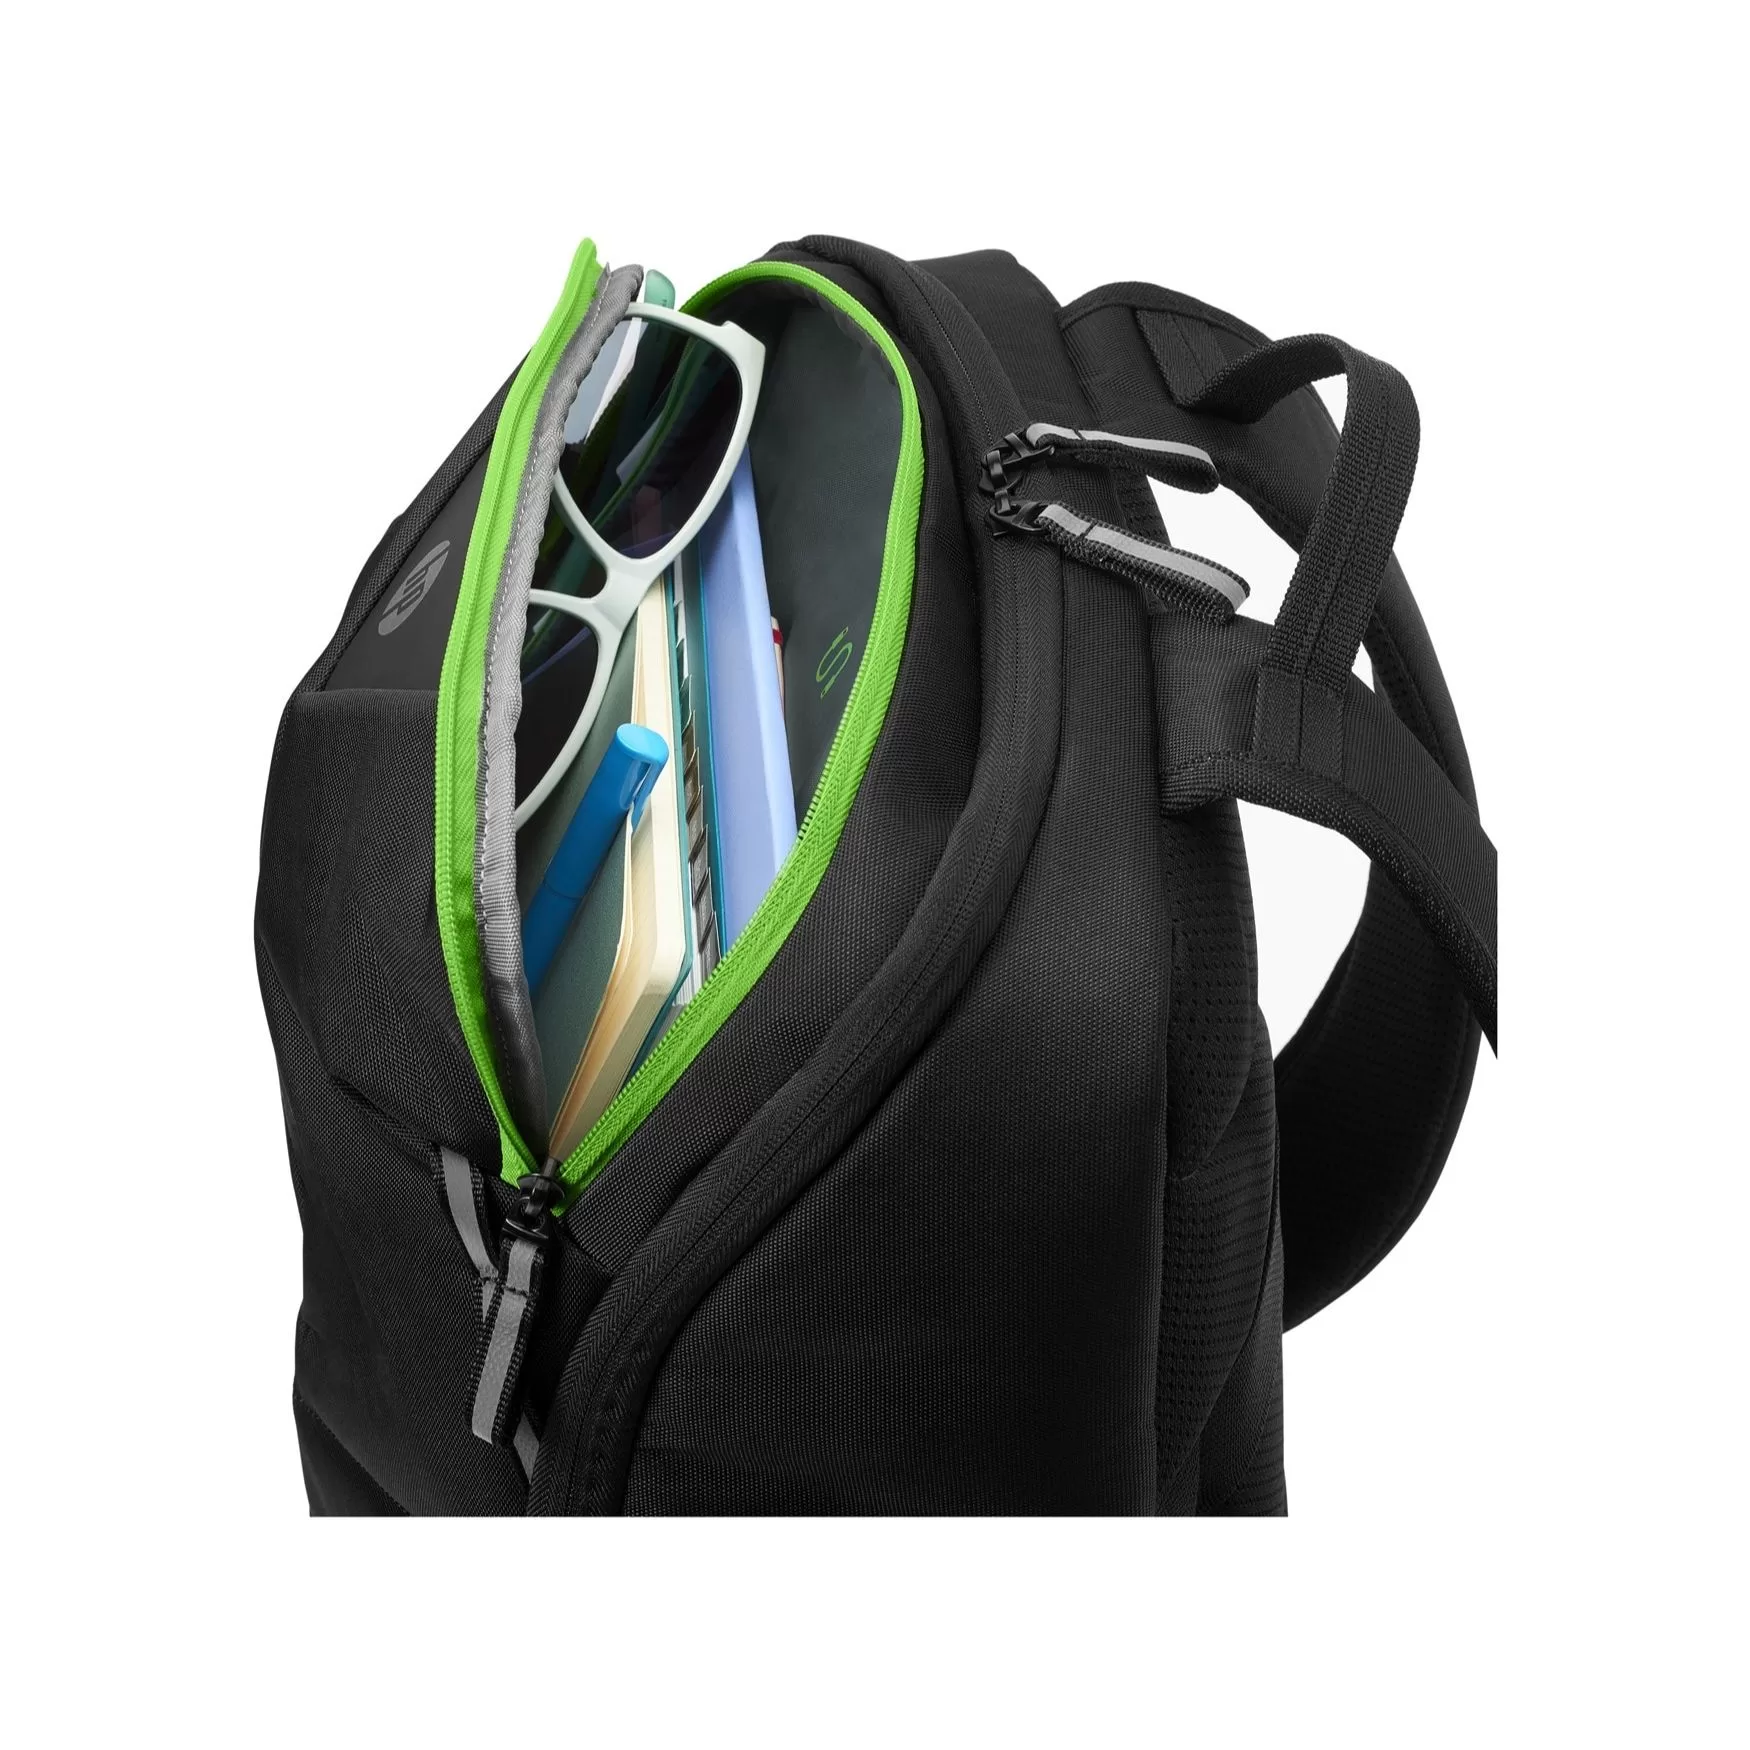 HP Pavilion Gaming Backpack 6EU57AA, 15.6 Inch Accessories 13